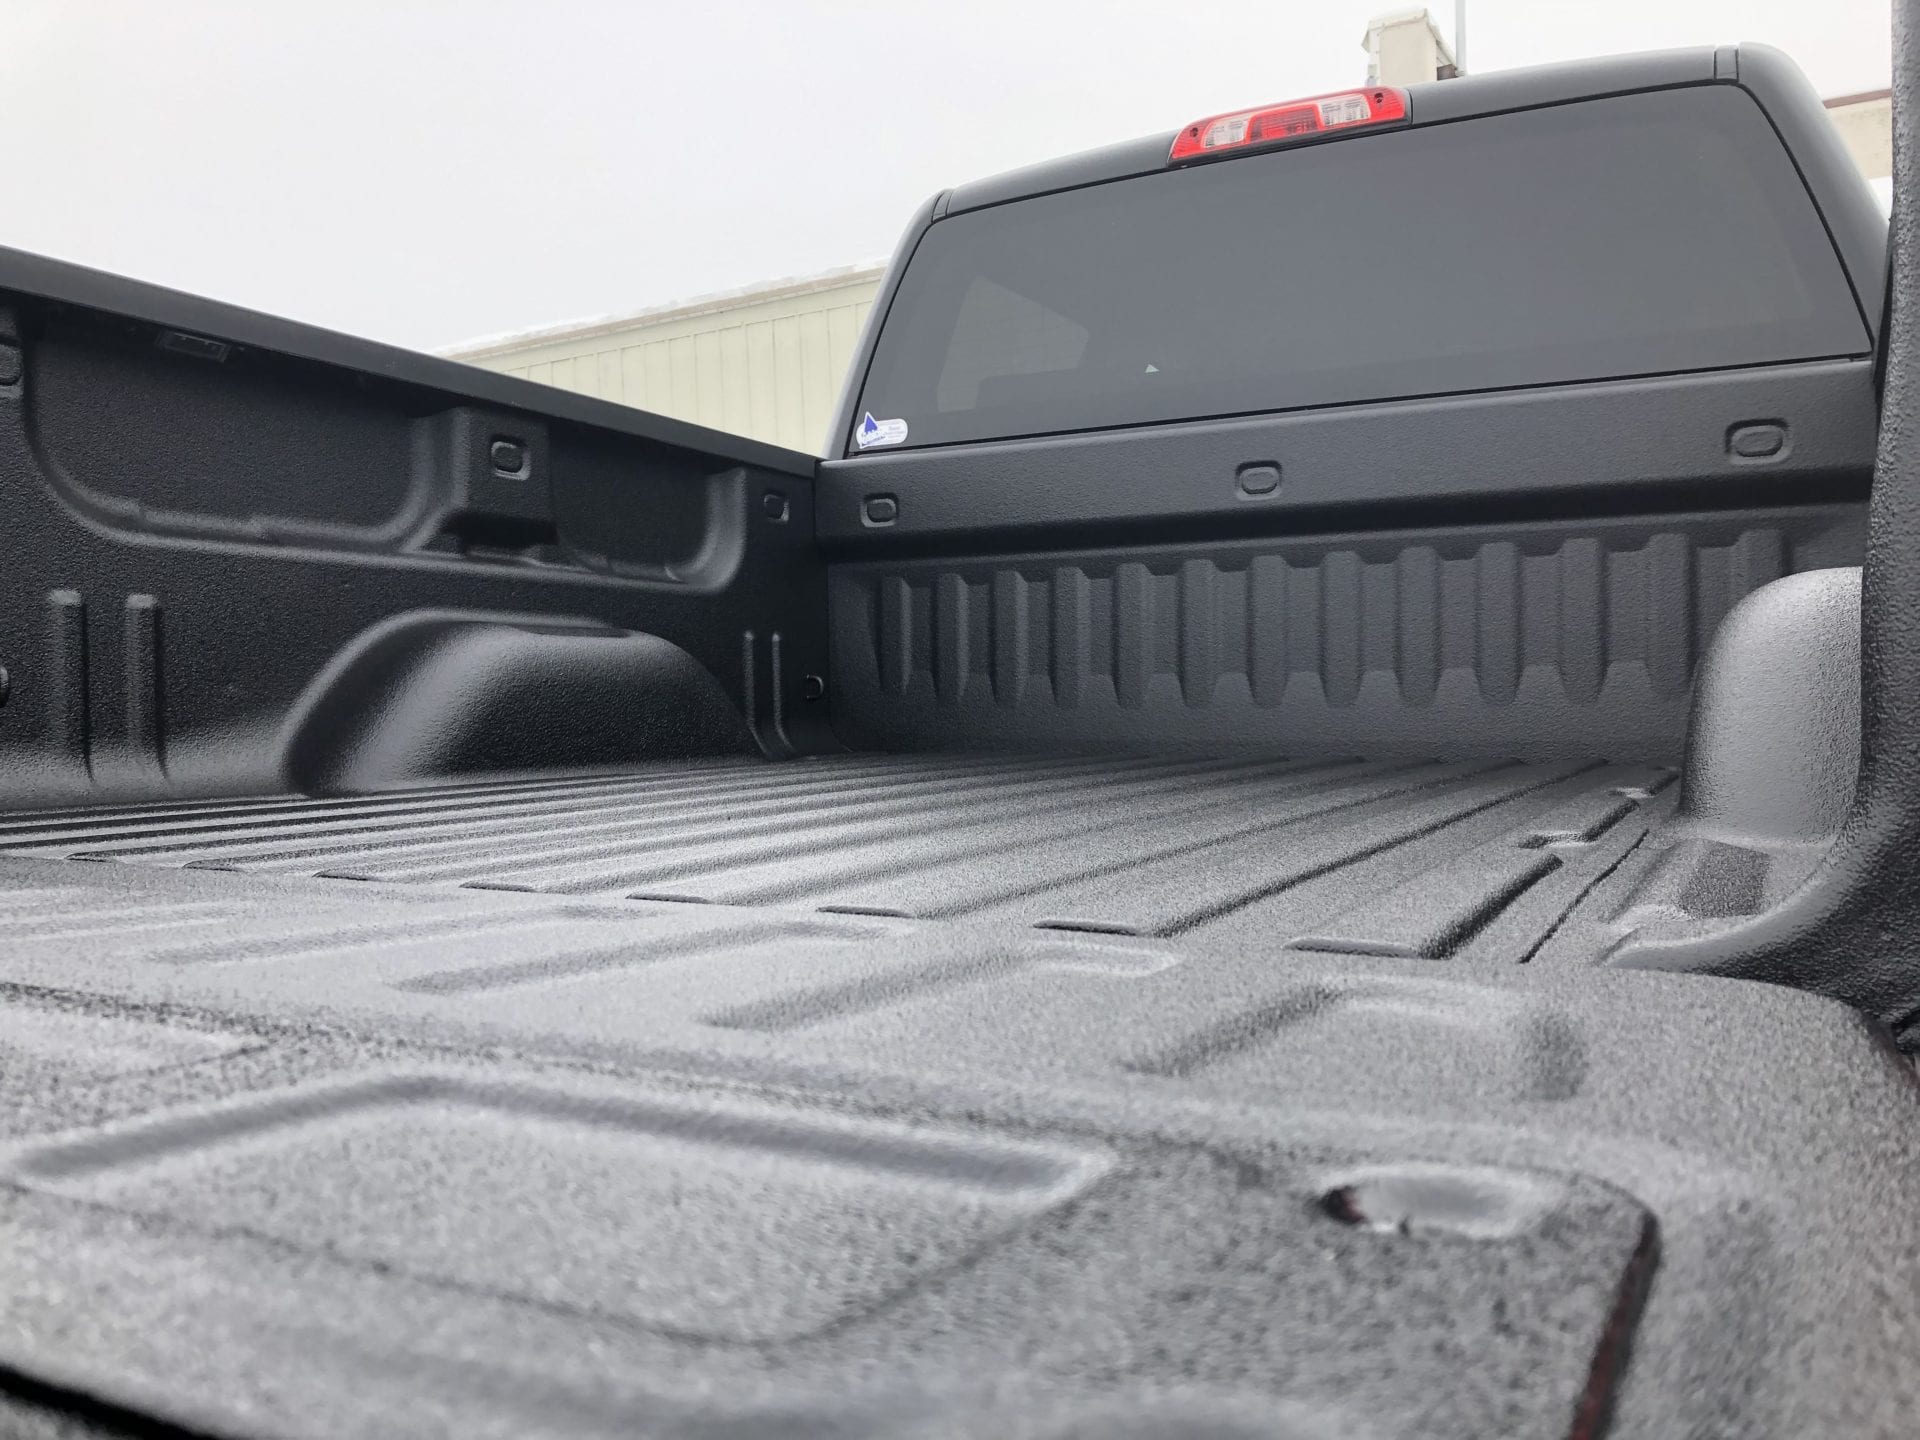 Spray-In Bed Liners from Osseo Plastics & Supply in Osseo, Wisconsin